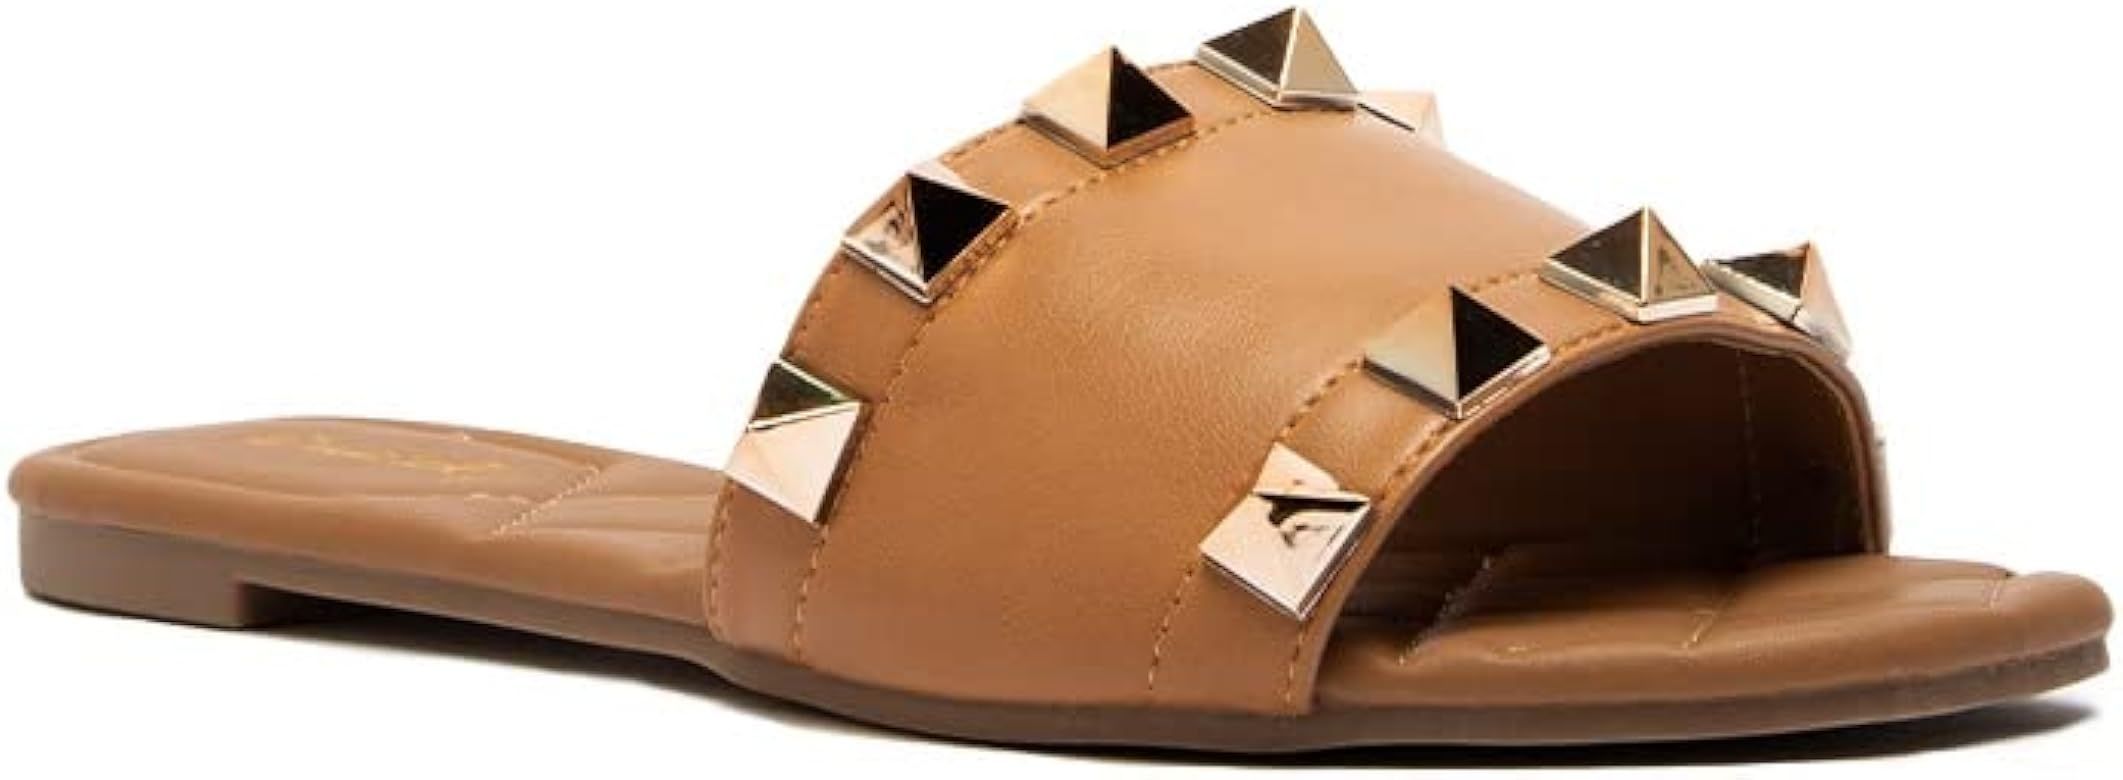 Qupid Sandals Slides for Women, Studded Womens Mules Slip On Shoes | Amazon (US)